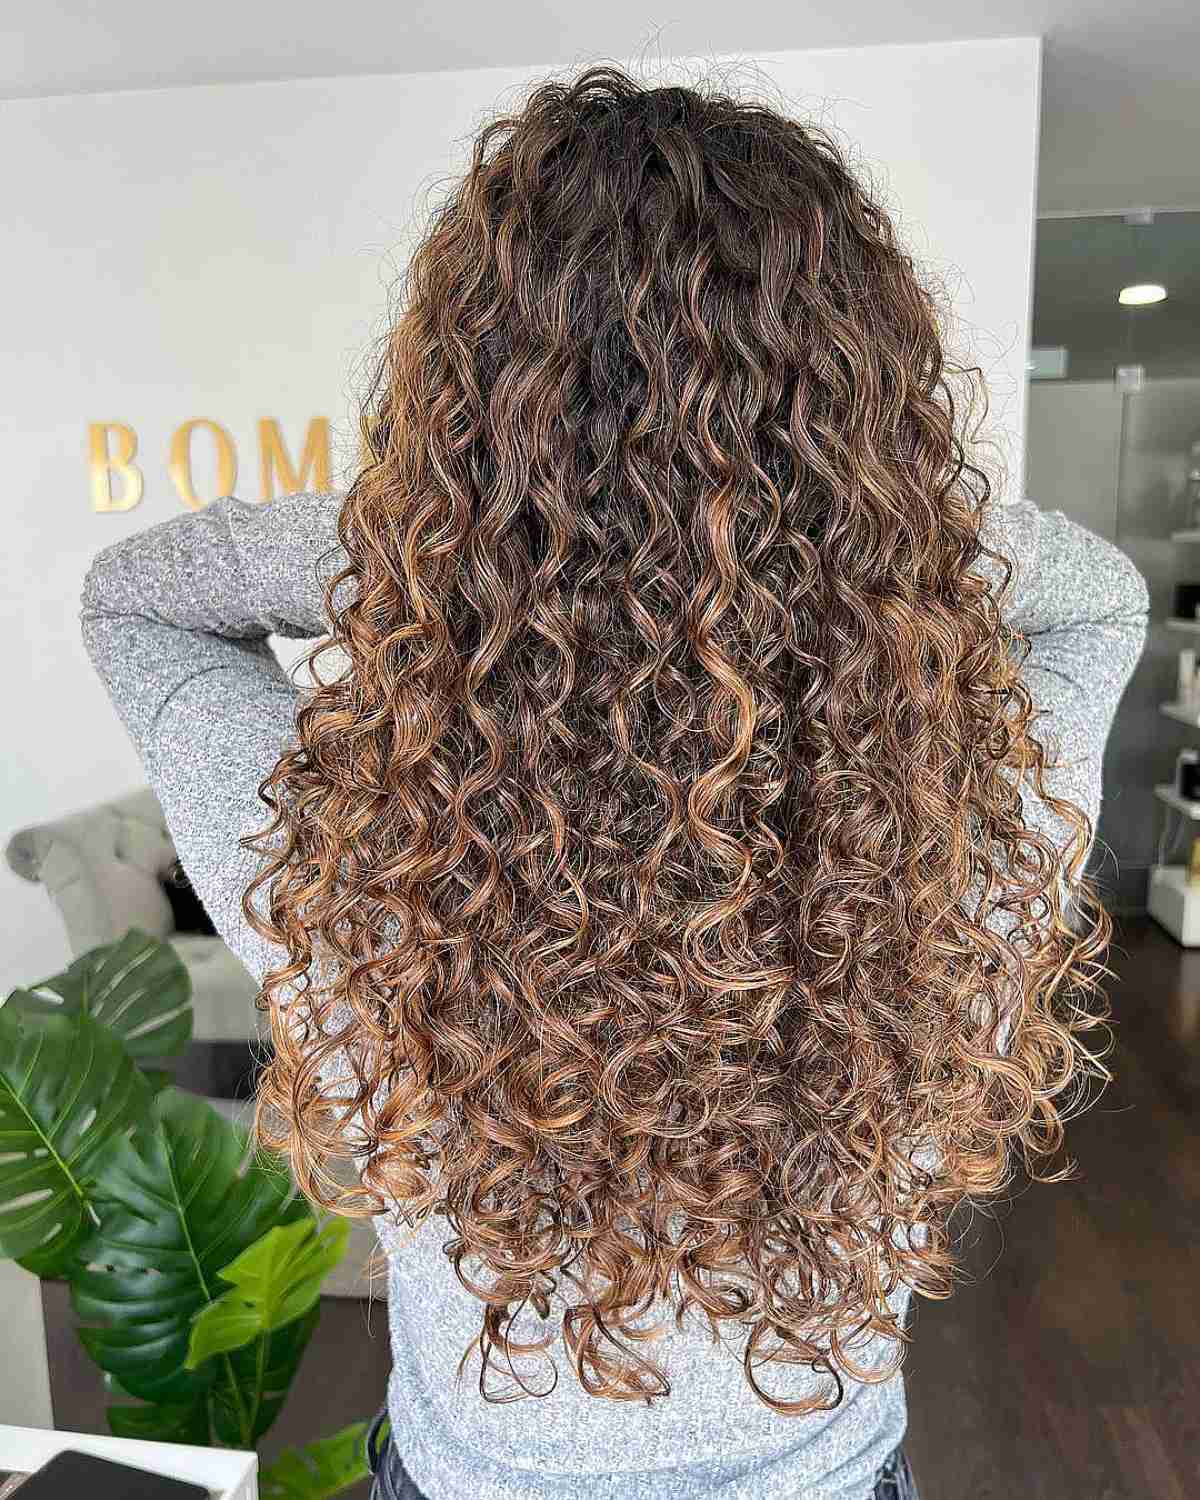 20 Short Hair Color Ideas for A Change-Up in 2020 | Highlights curly hair, Colored  curly hair, Short hair color